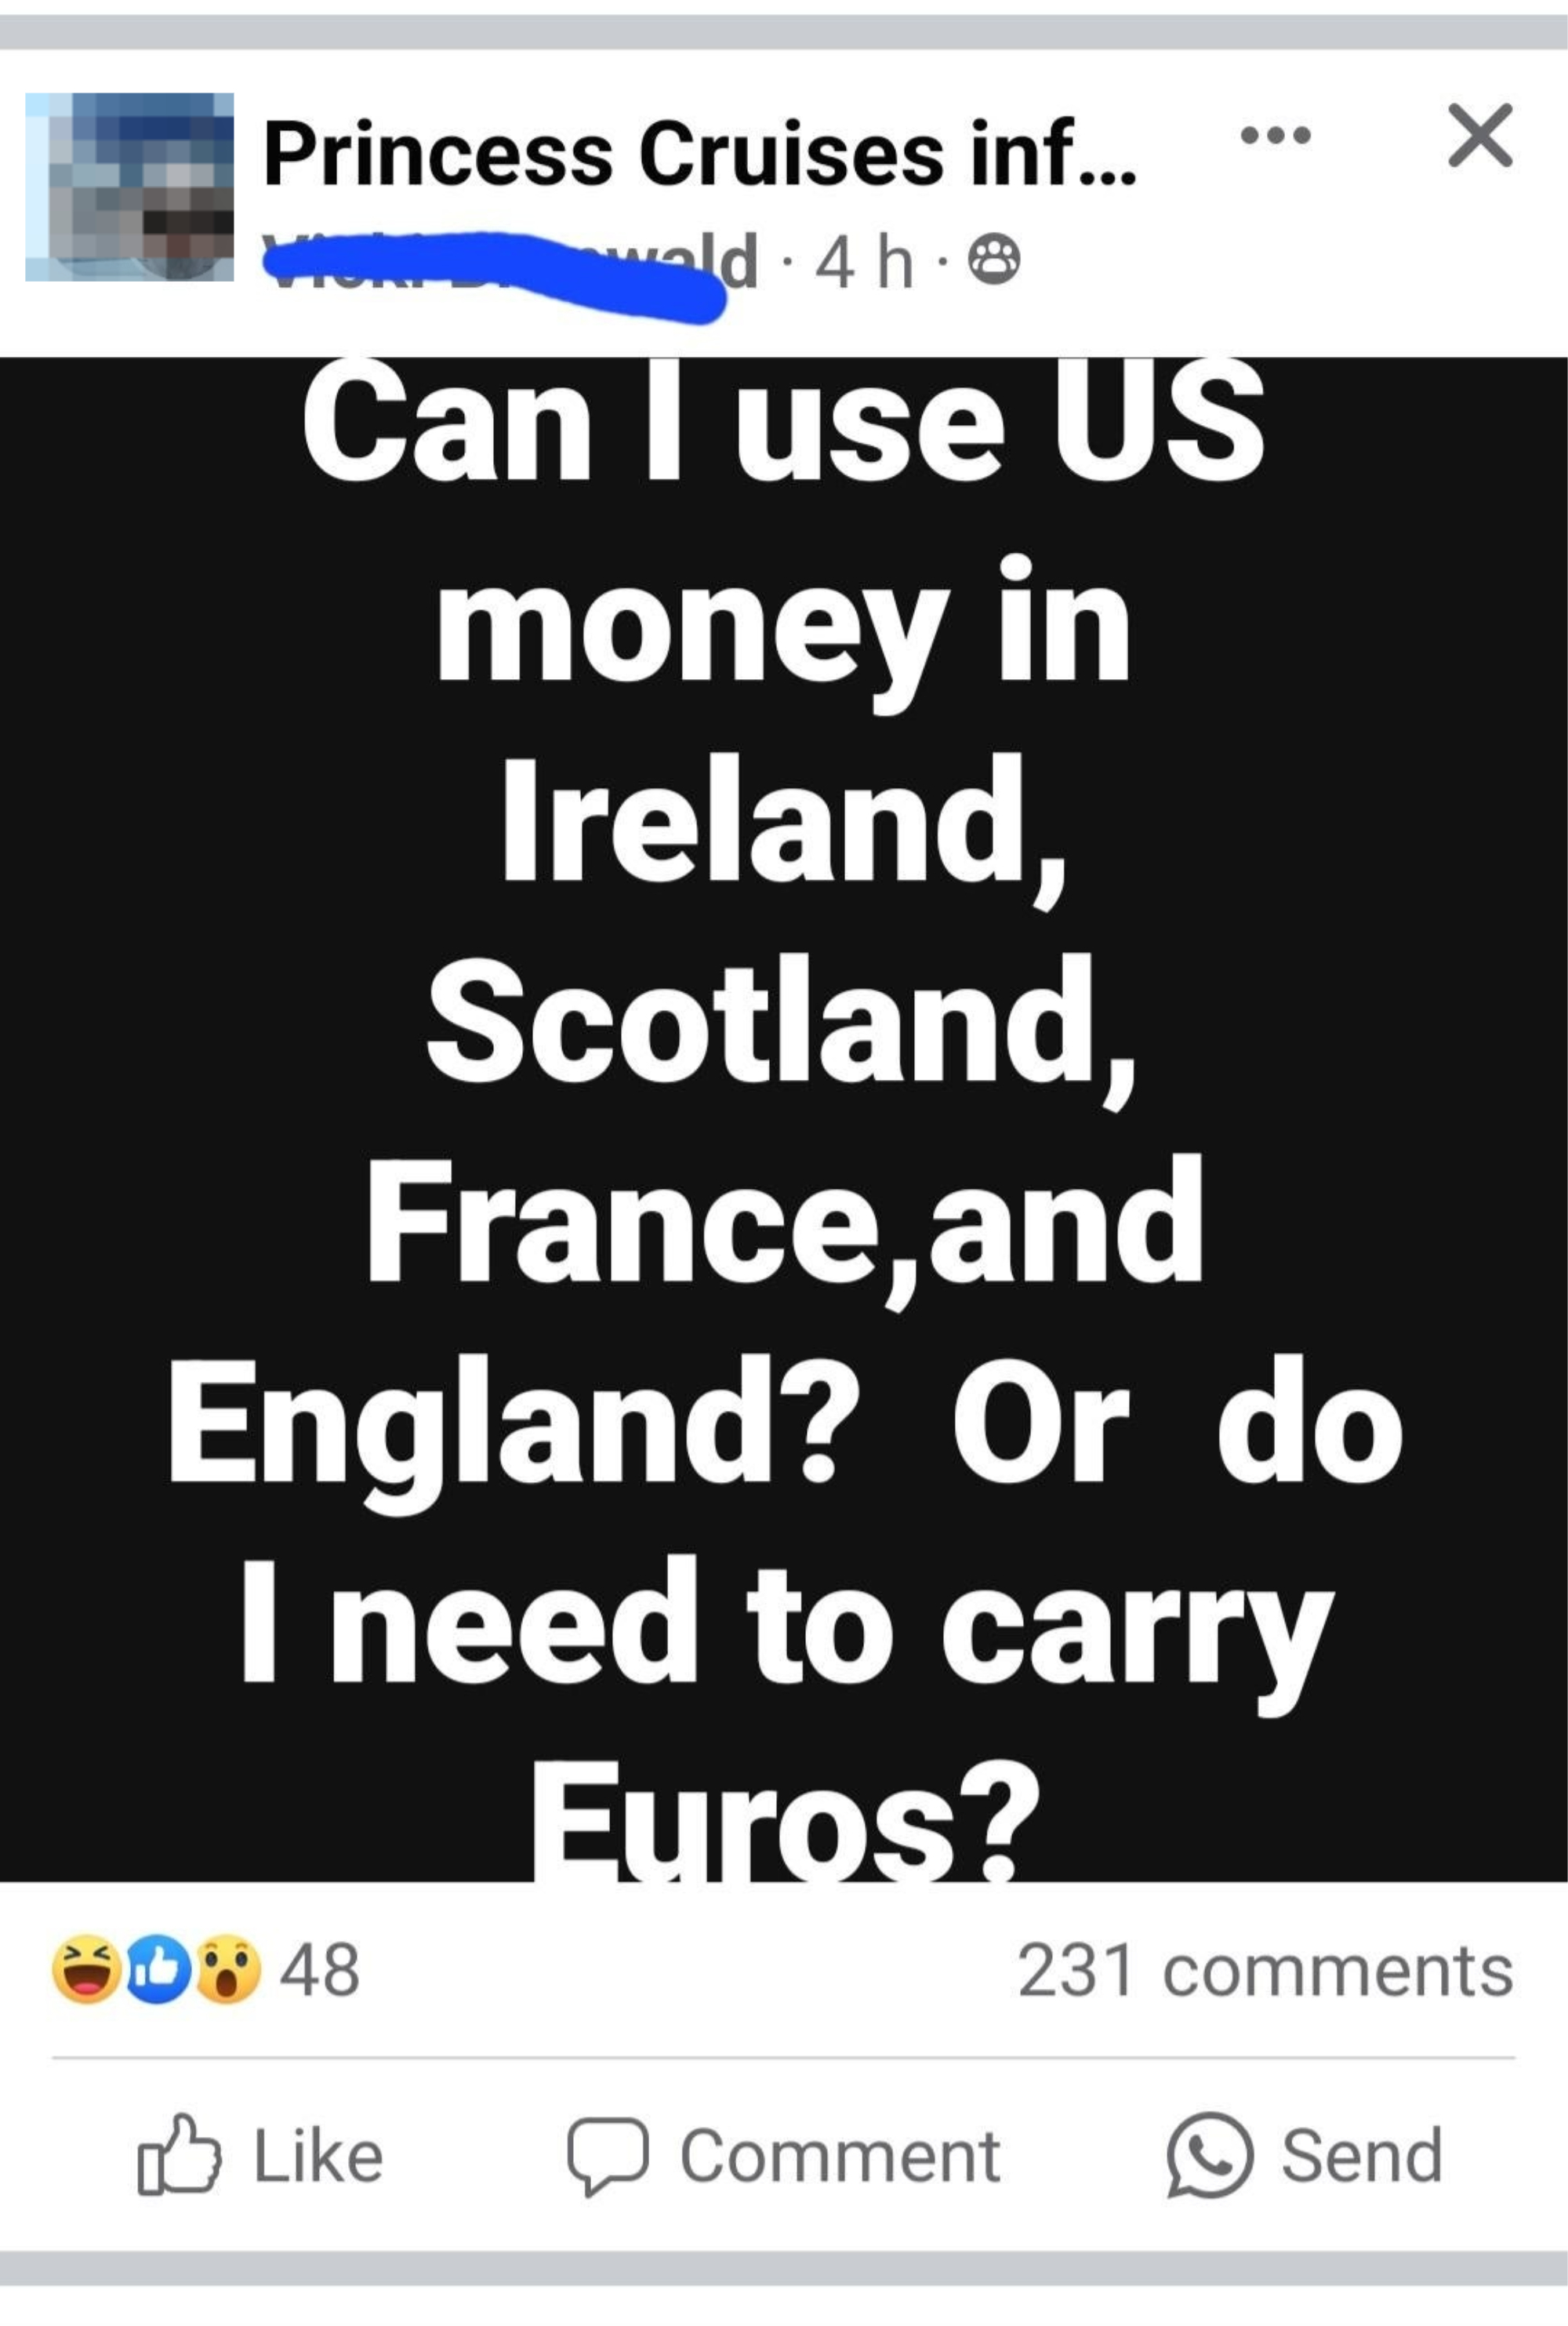 Question about currency use in Ireland, Scotland, France, and England, asking if US money is accepted or if Euros are needed